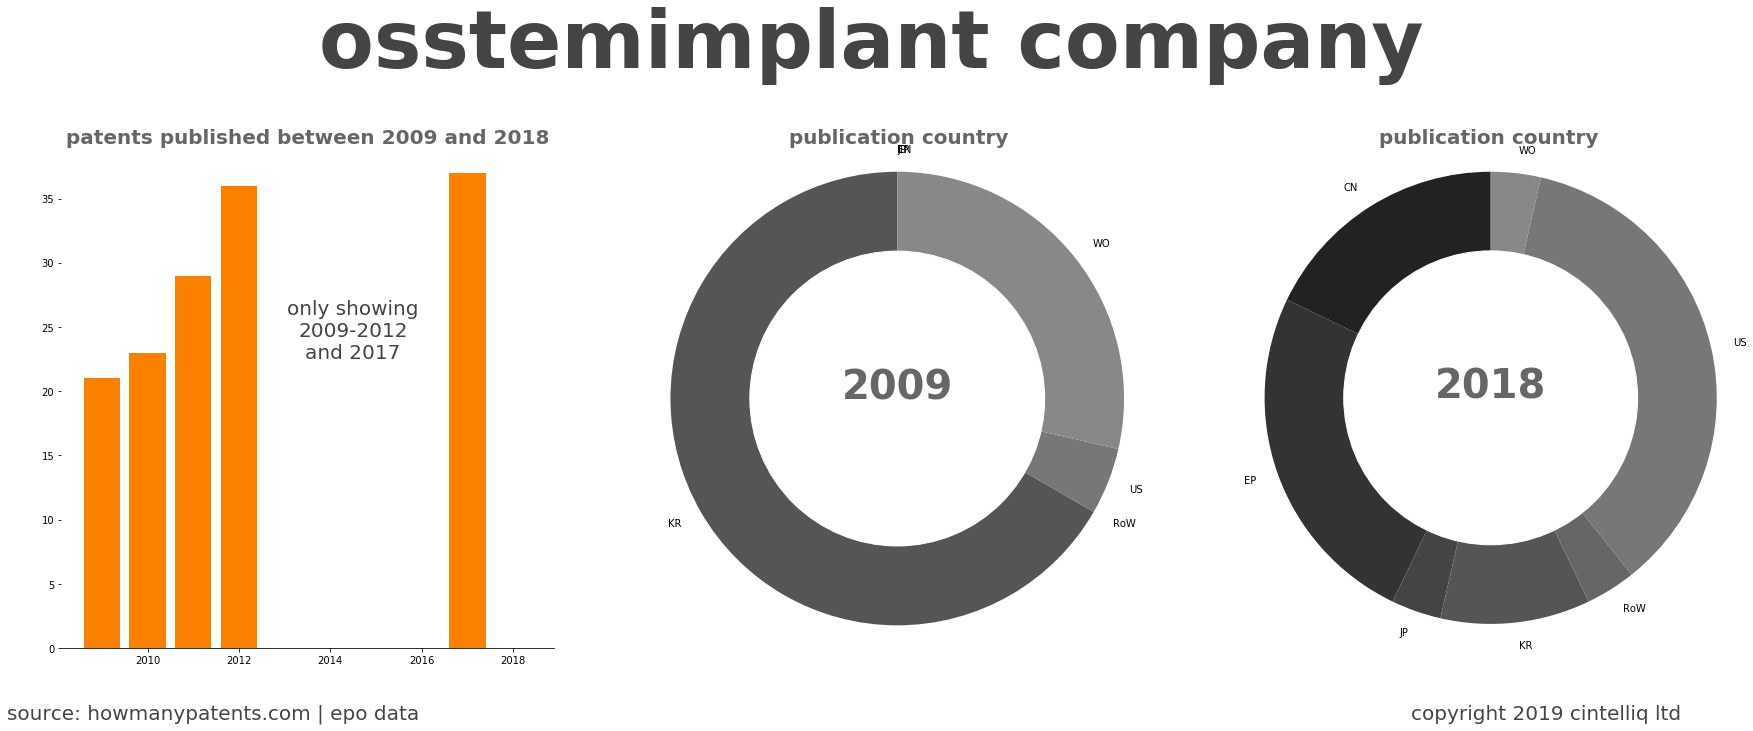 summary of patents for Osstemimplant Company